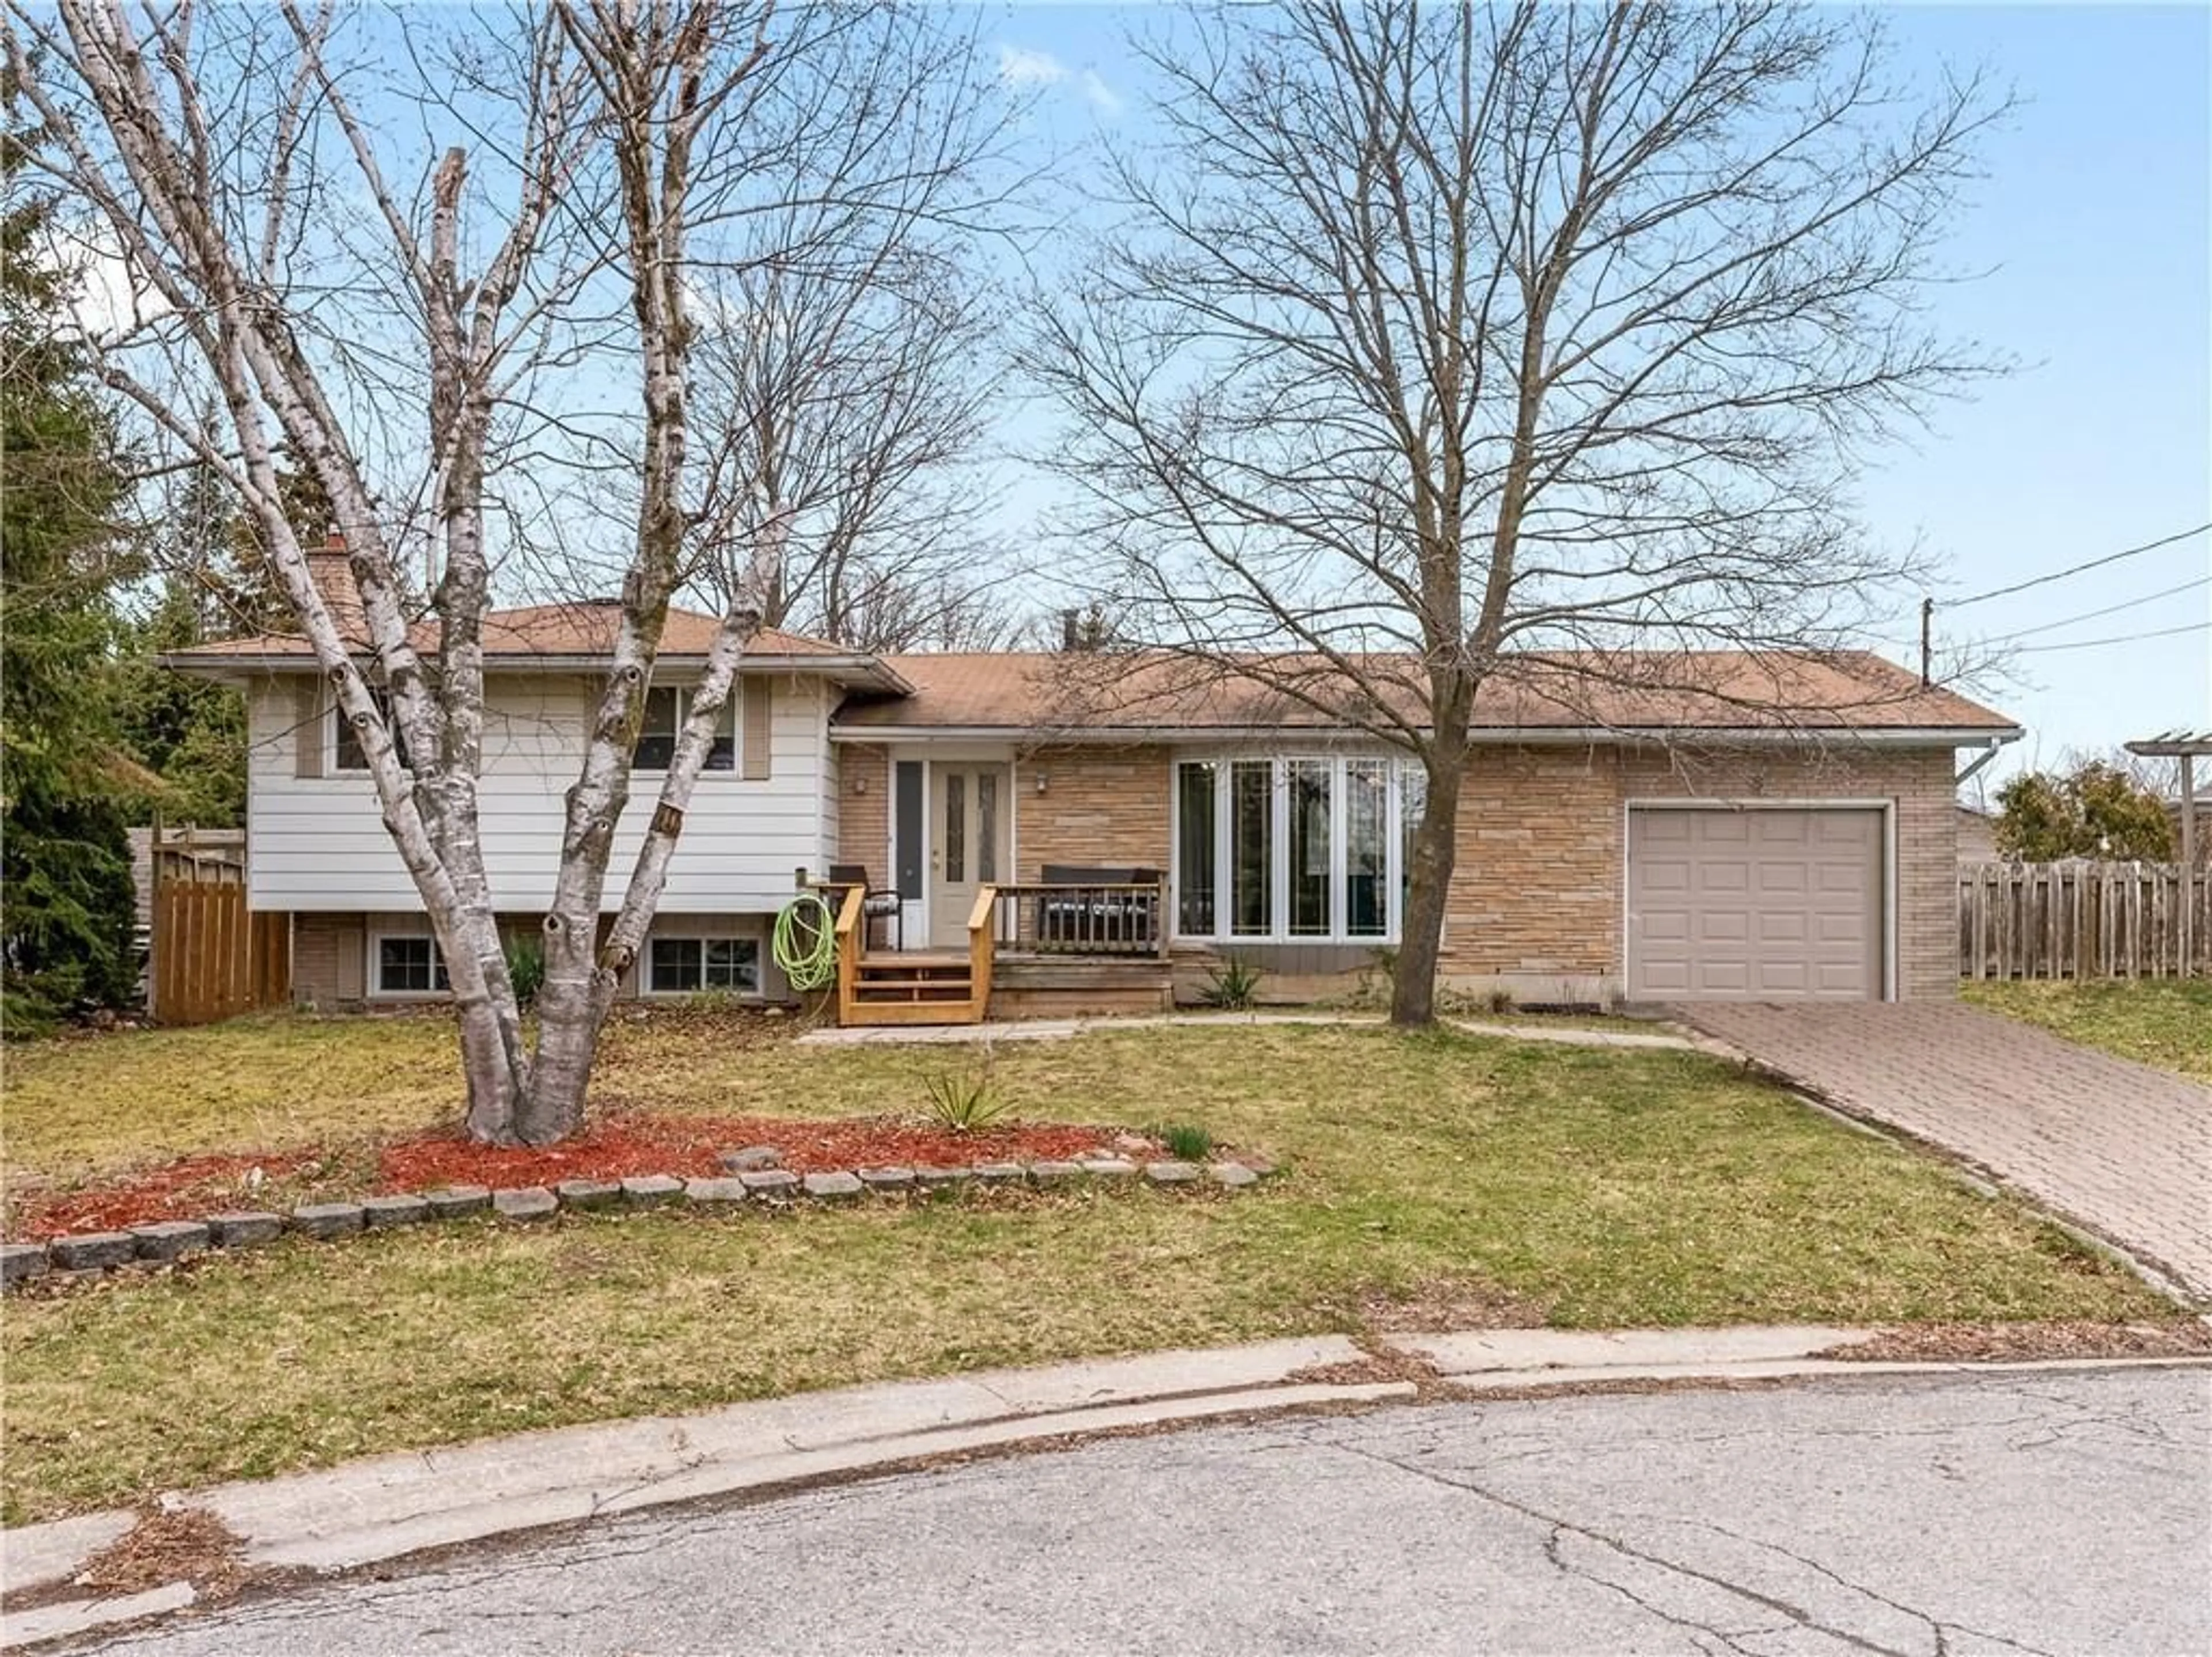 Home with brick exterior material for 27 MCGREGOR Pl, Caledonia Ontario N3W 1K1